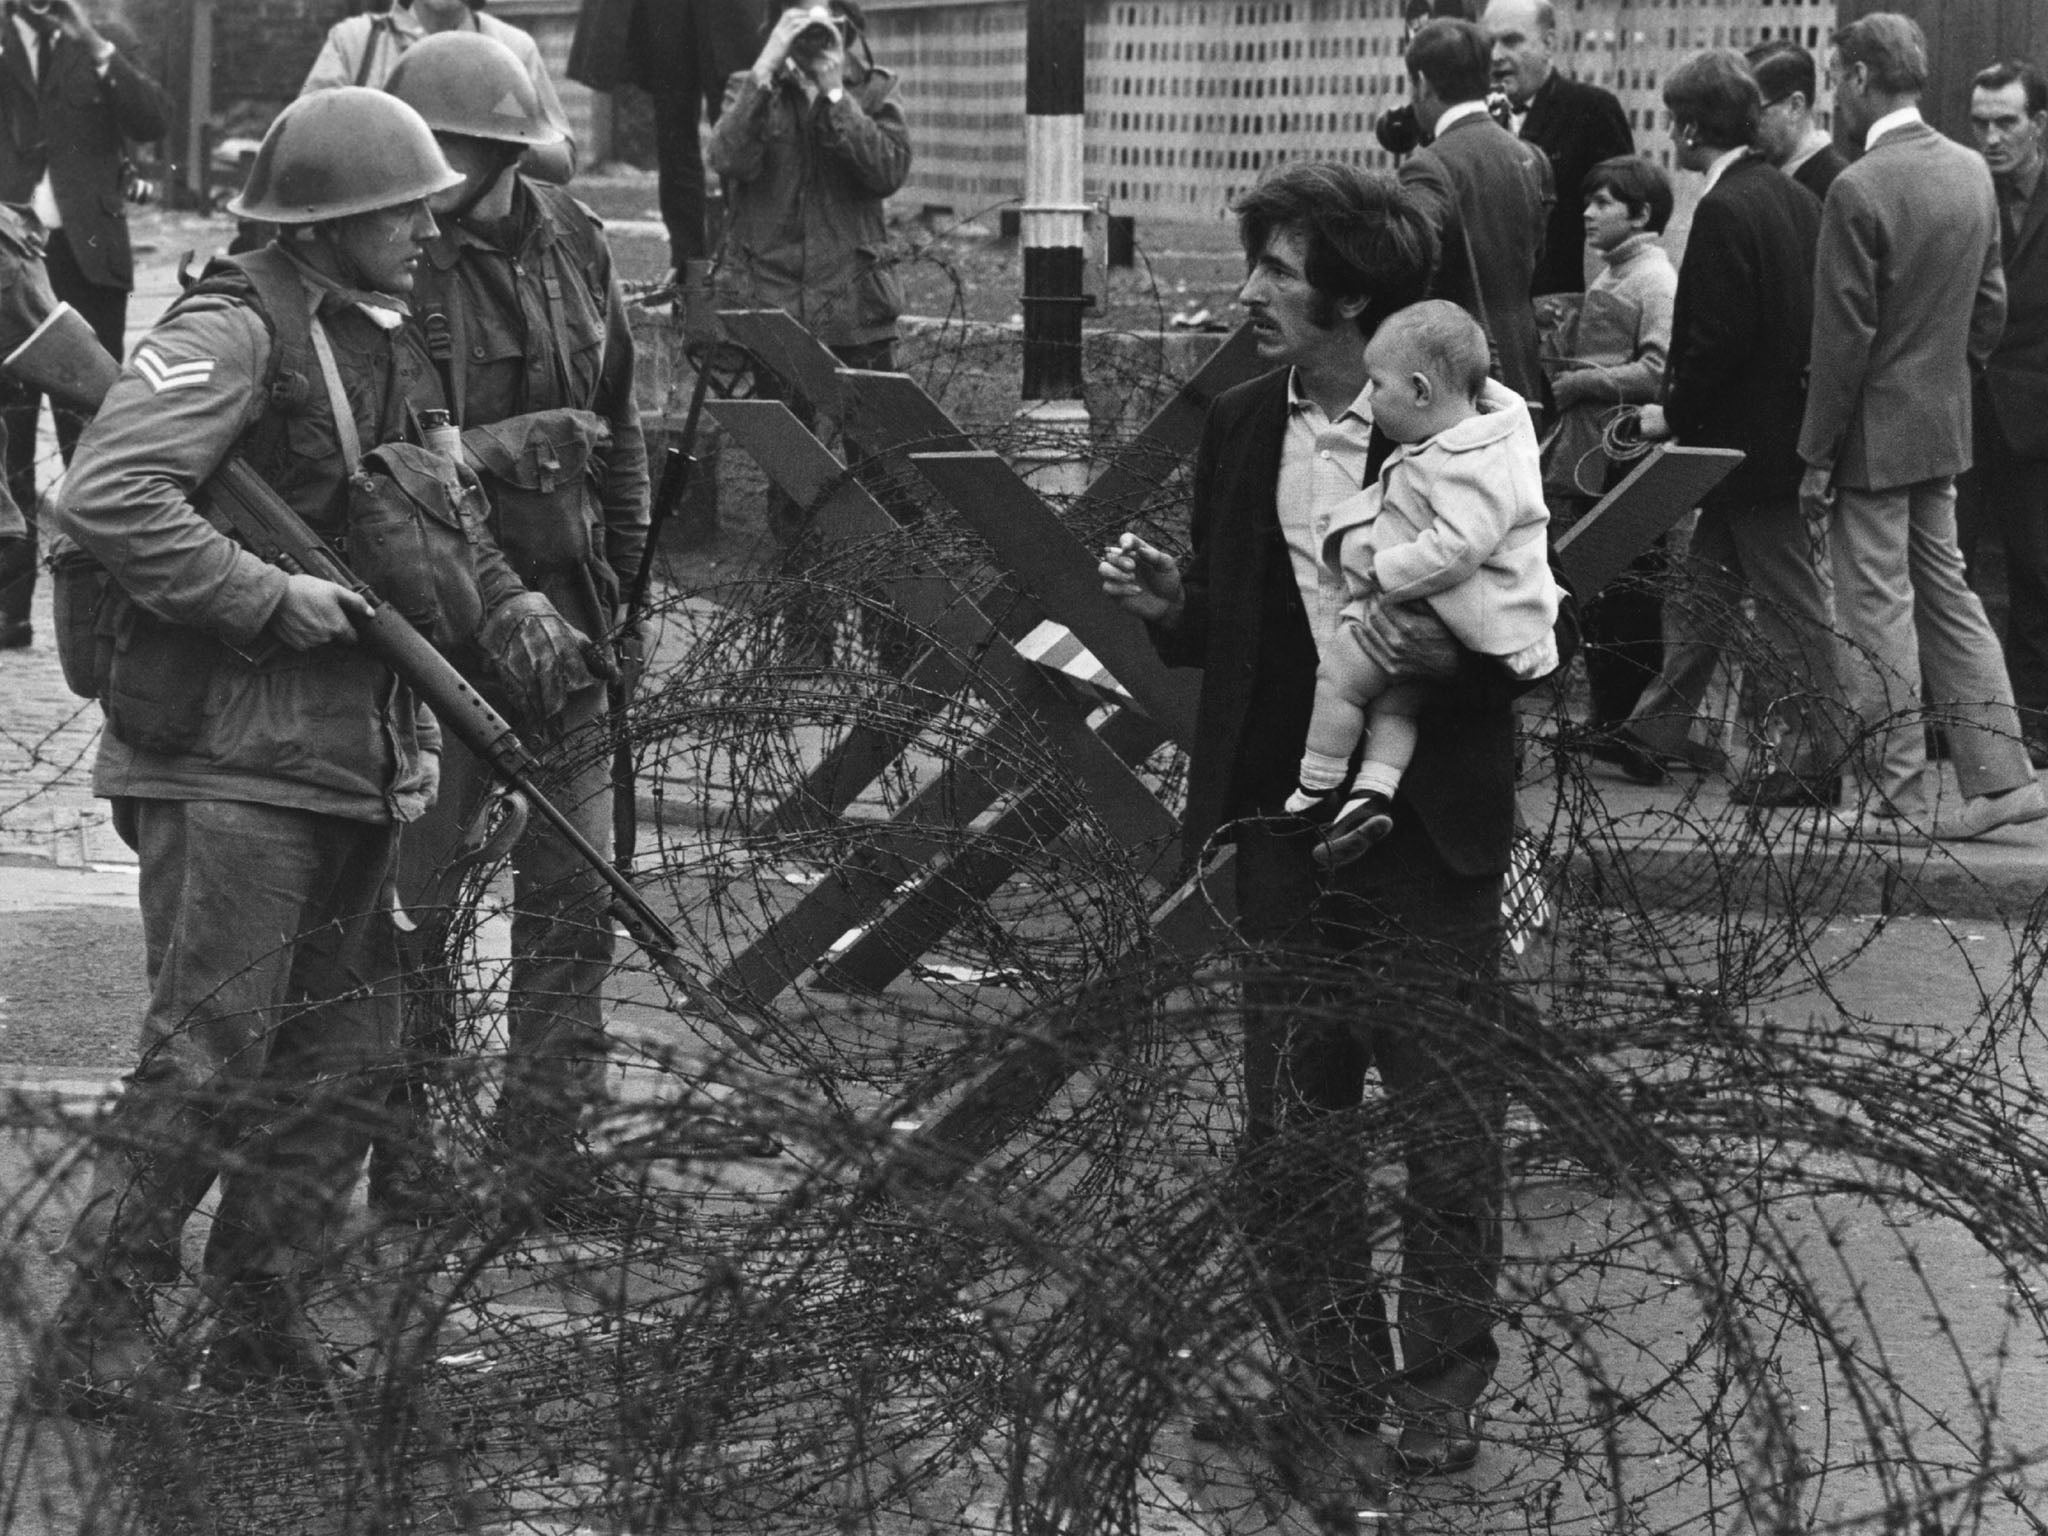 British soldiers stop a man trying to carry his baby through a barricade on the Catholic Falls Road area of Belfast in August 1969